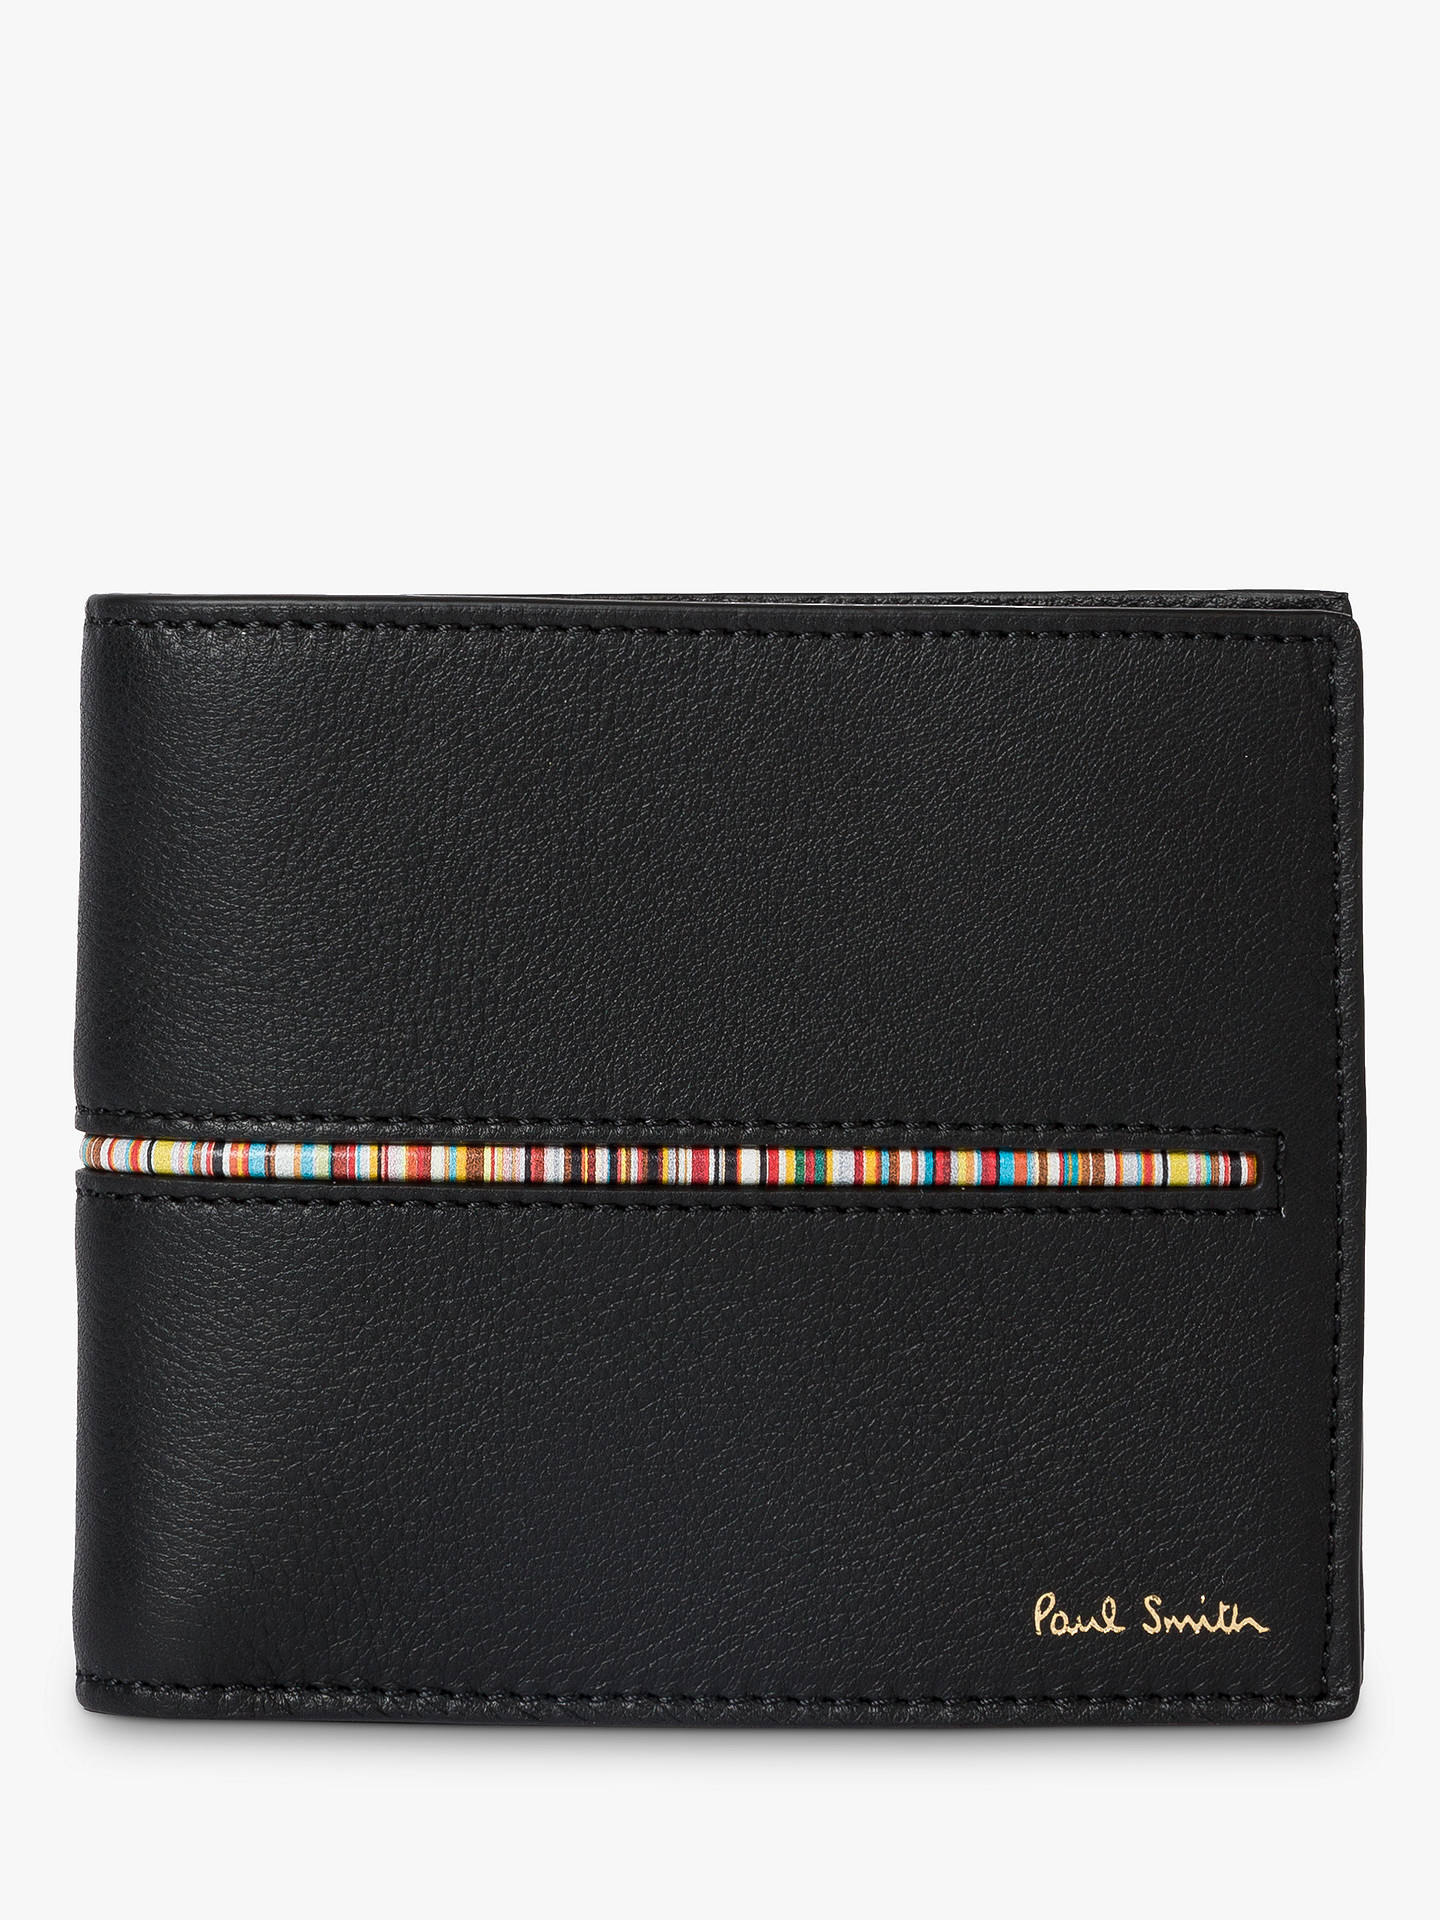 Paul Smith Signature Stripe Piping Leather Wallet, Black/Multi at John